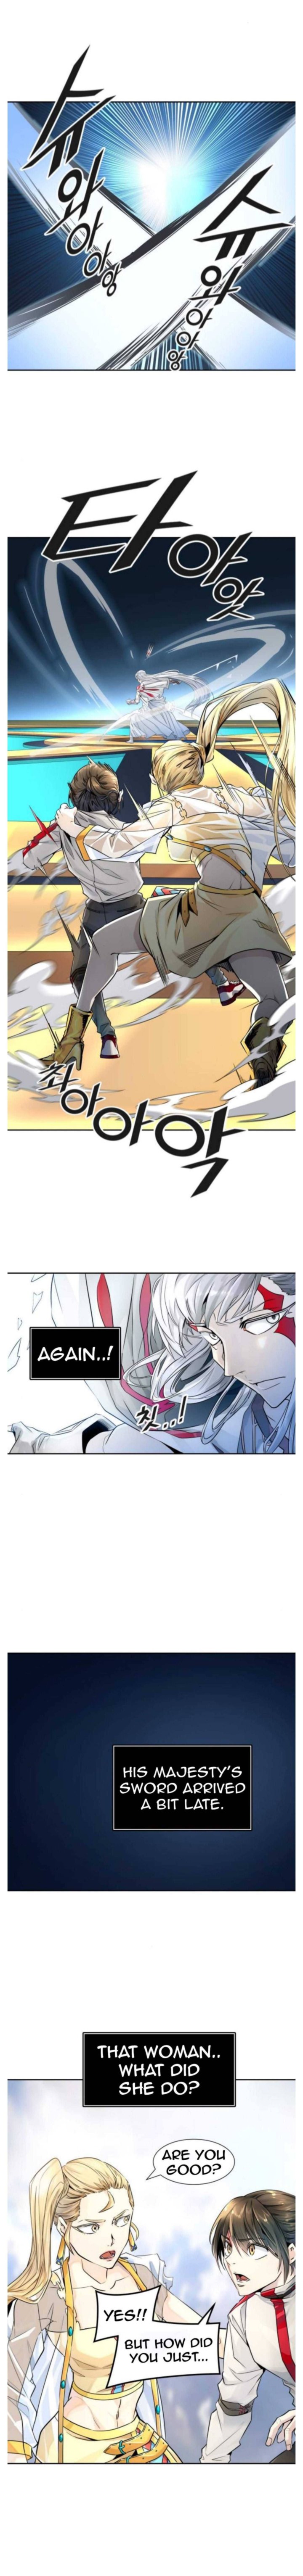 Tower Of God 498 7